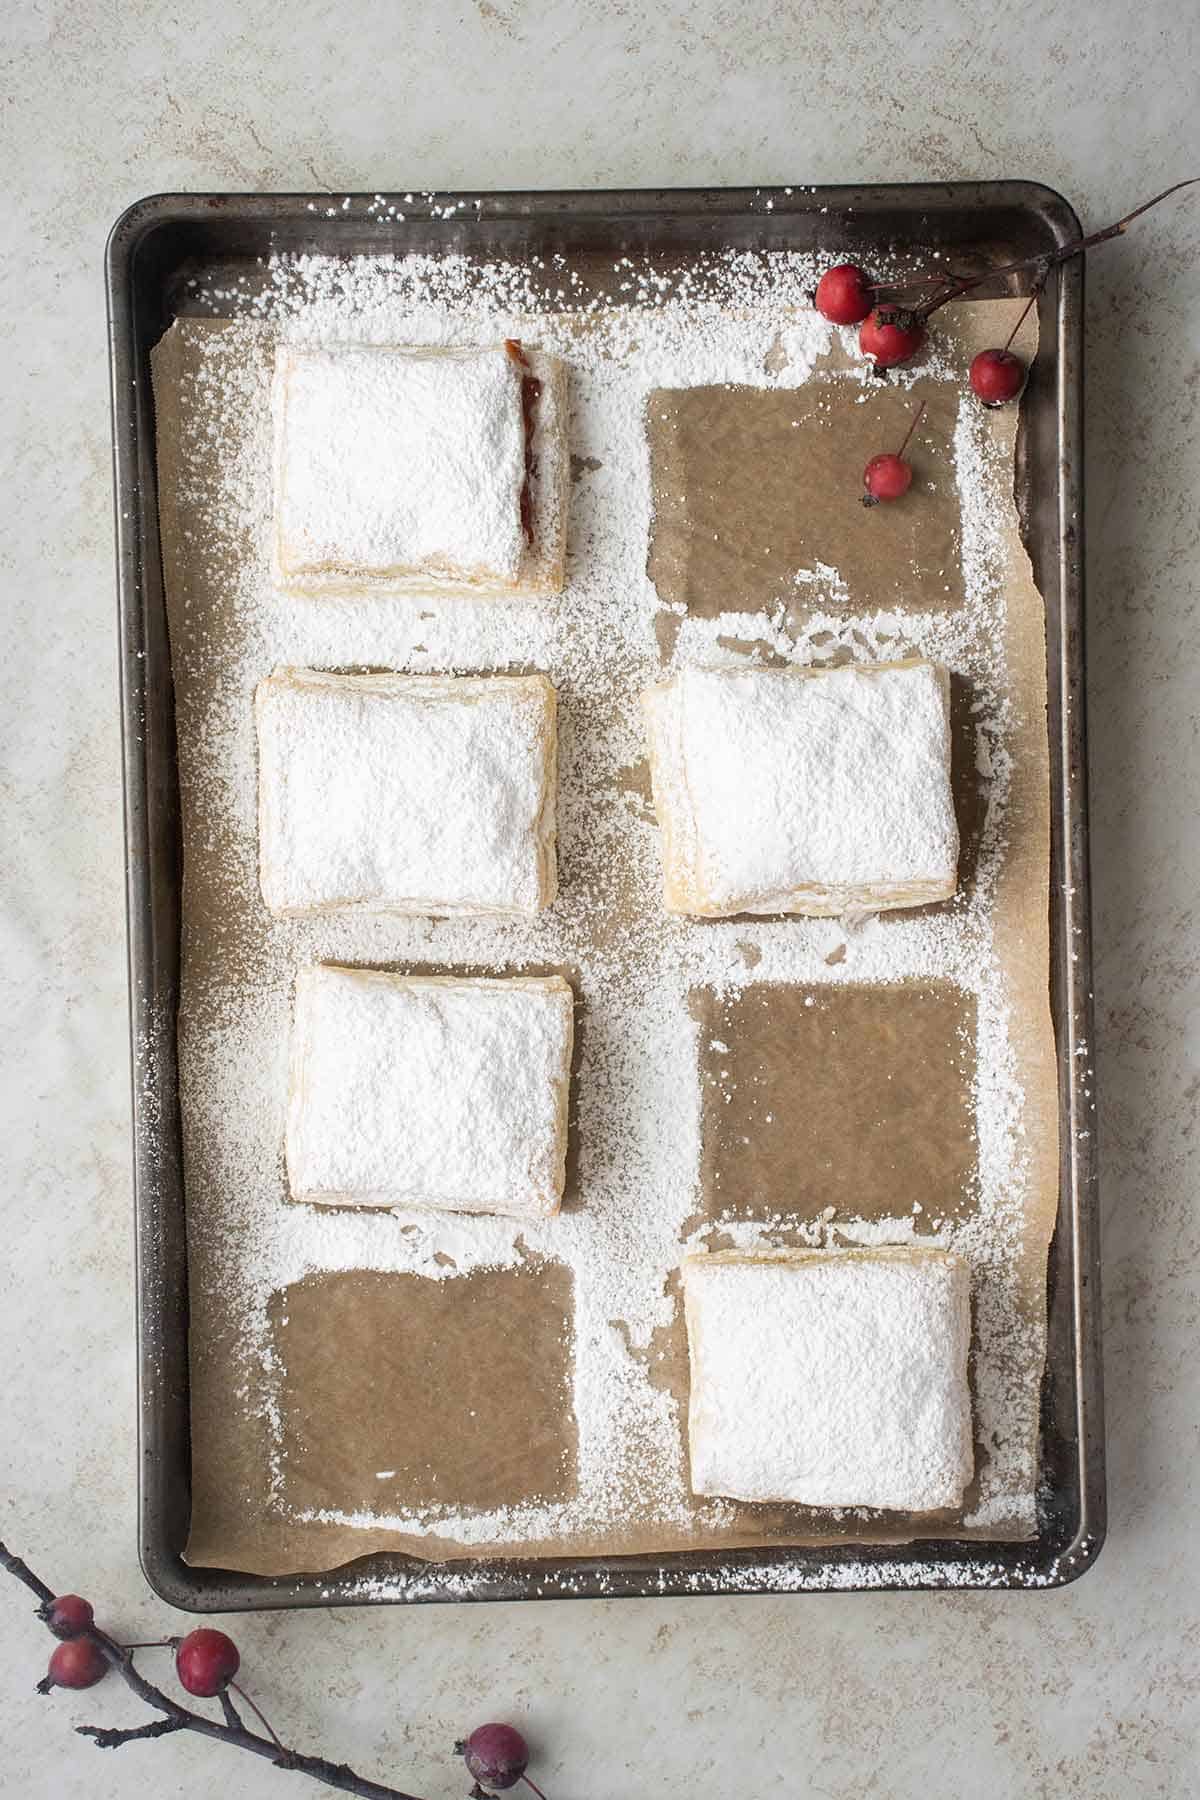 a baking tray with 5 guava pastries with powder sugar and wild berries around.